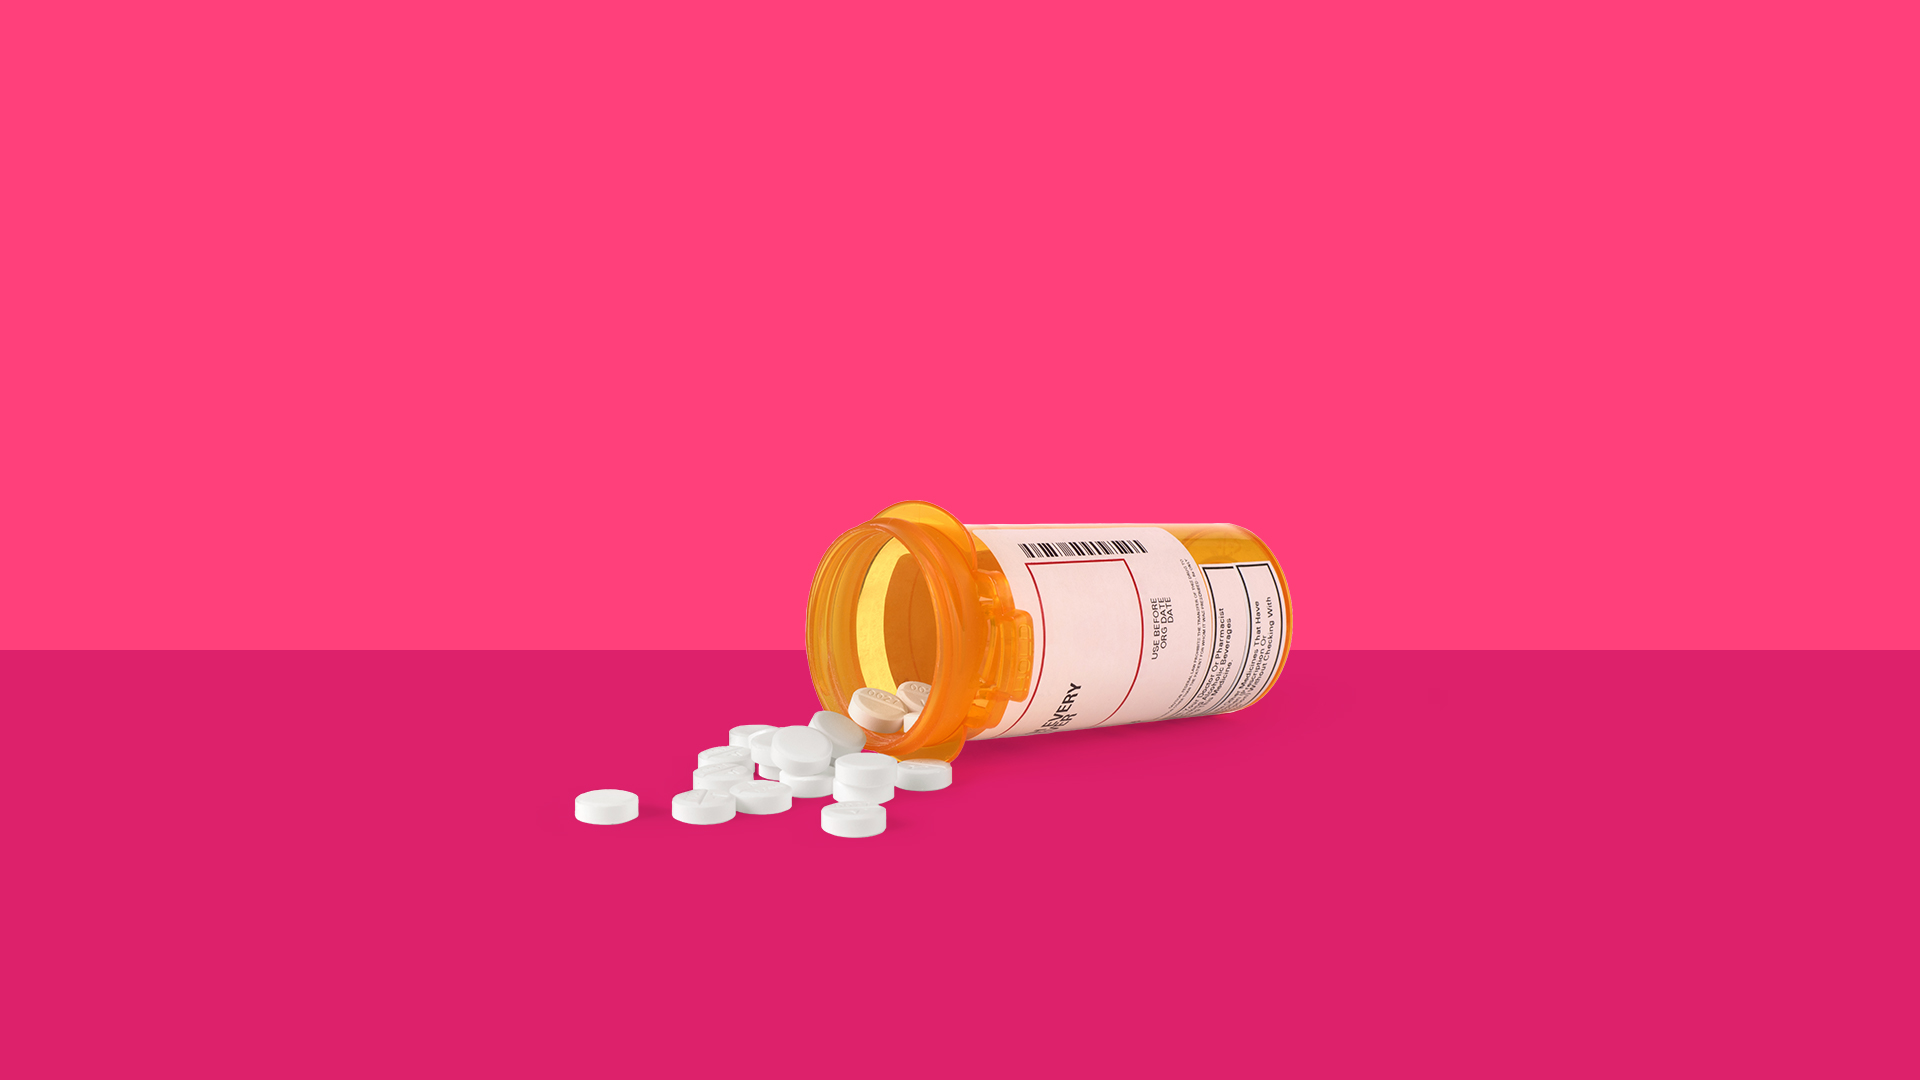 Spilled pills from prescription bottle: Common vs. serious Viibryd side effects